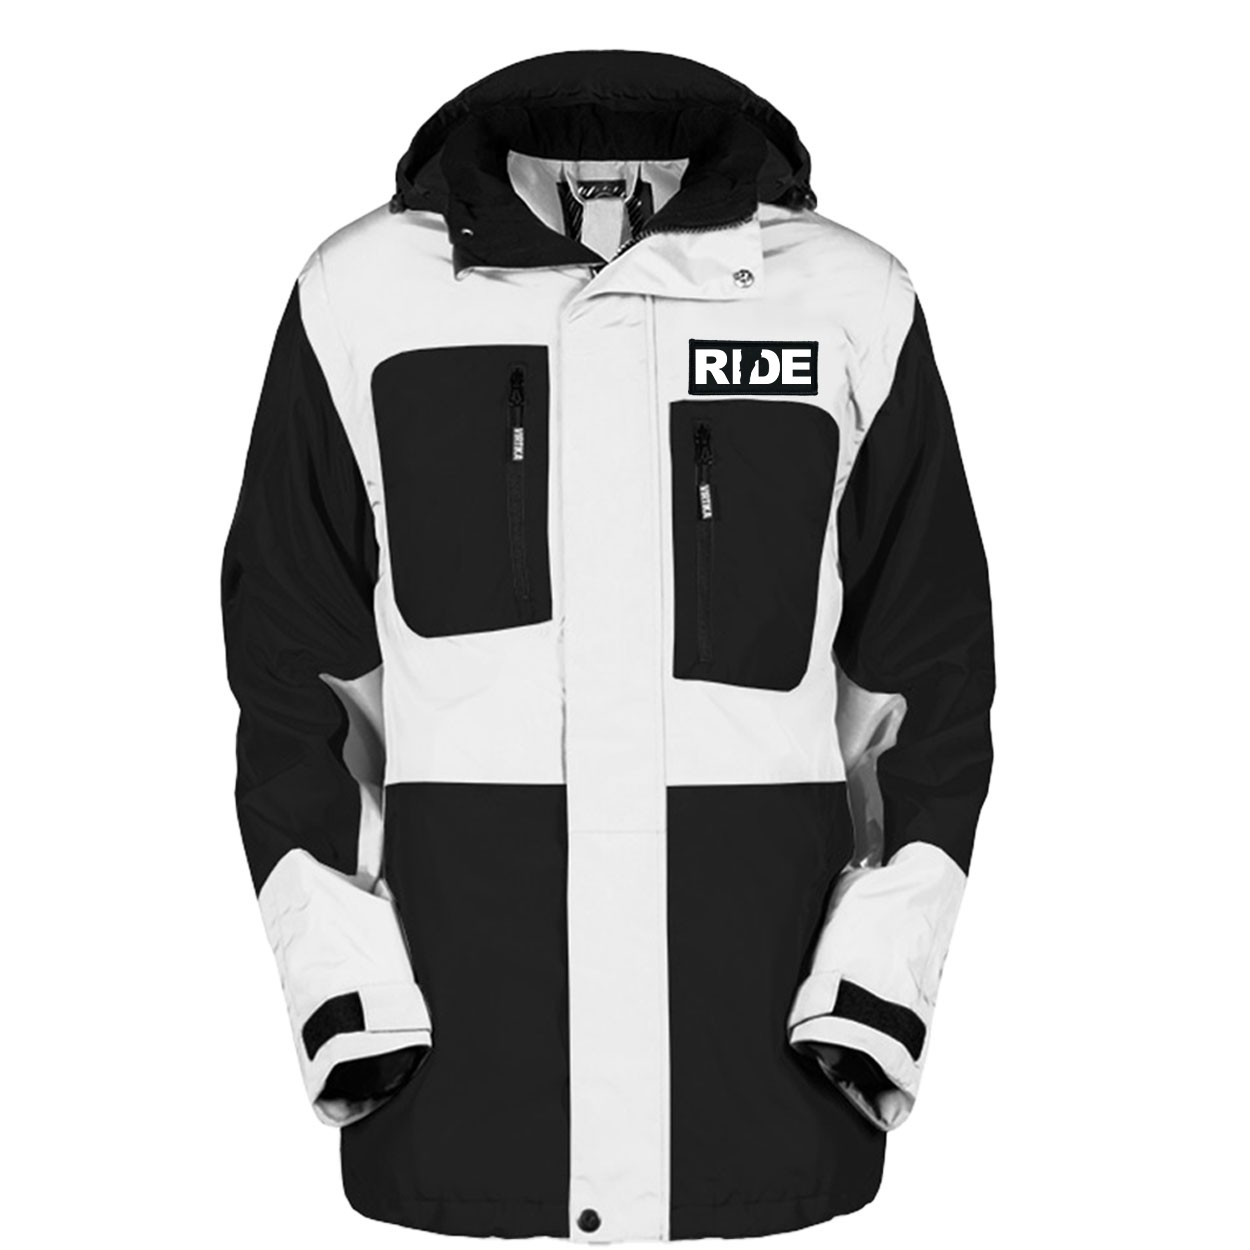 Ride Vermont Classic Woven Patch Pro Snowboard Jacket (Black/White)